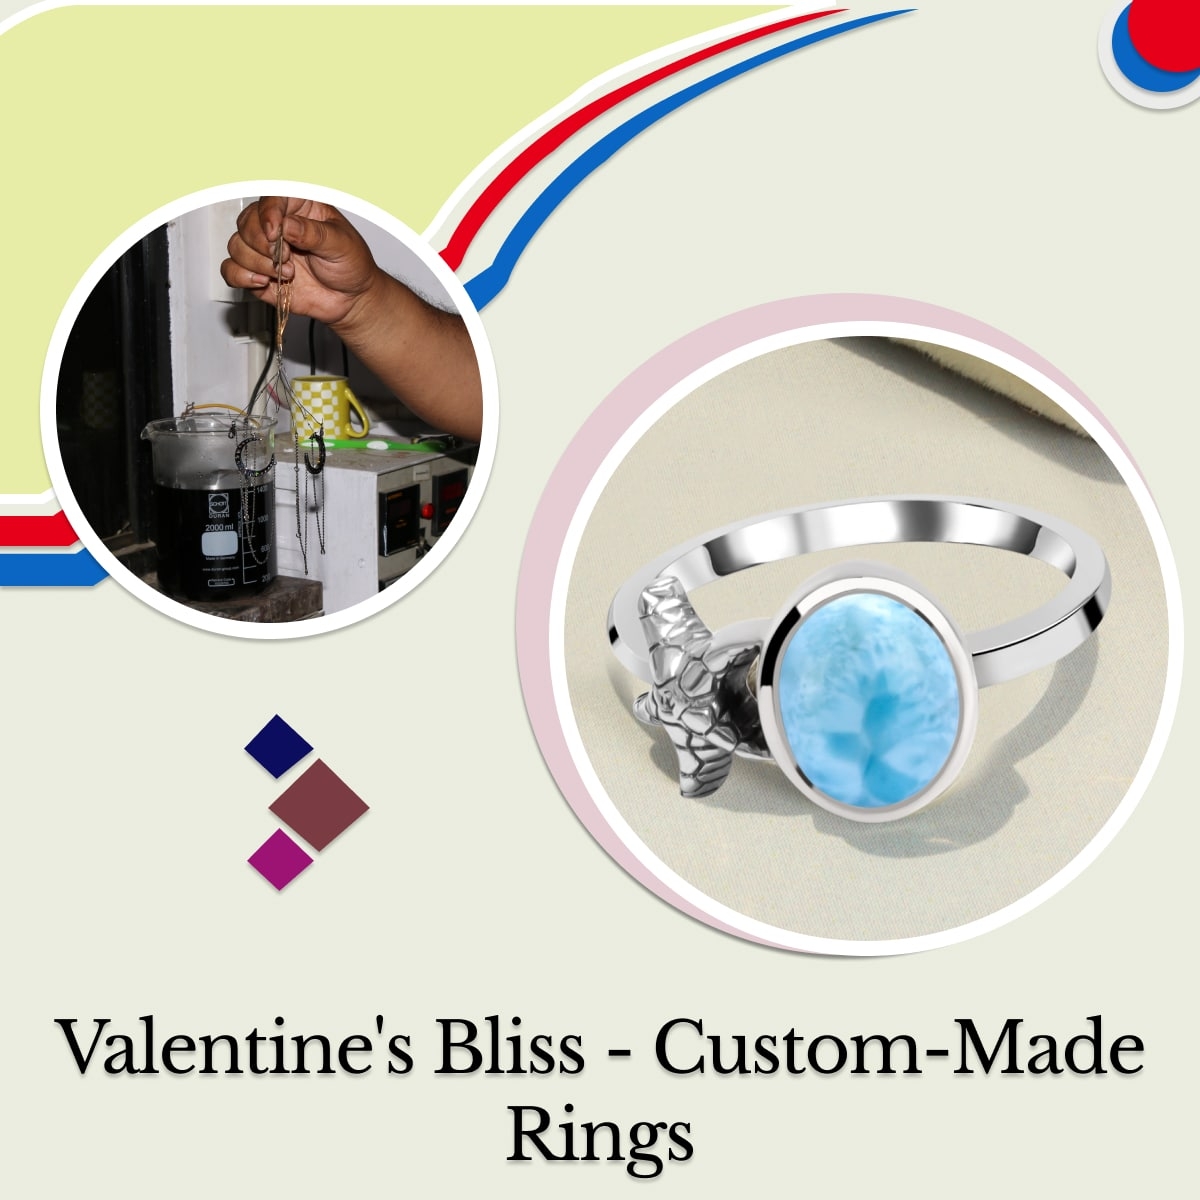 Make This Valentine's Special for Her with Custom Made Rings